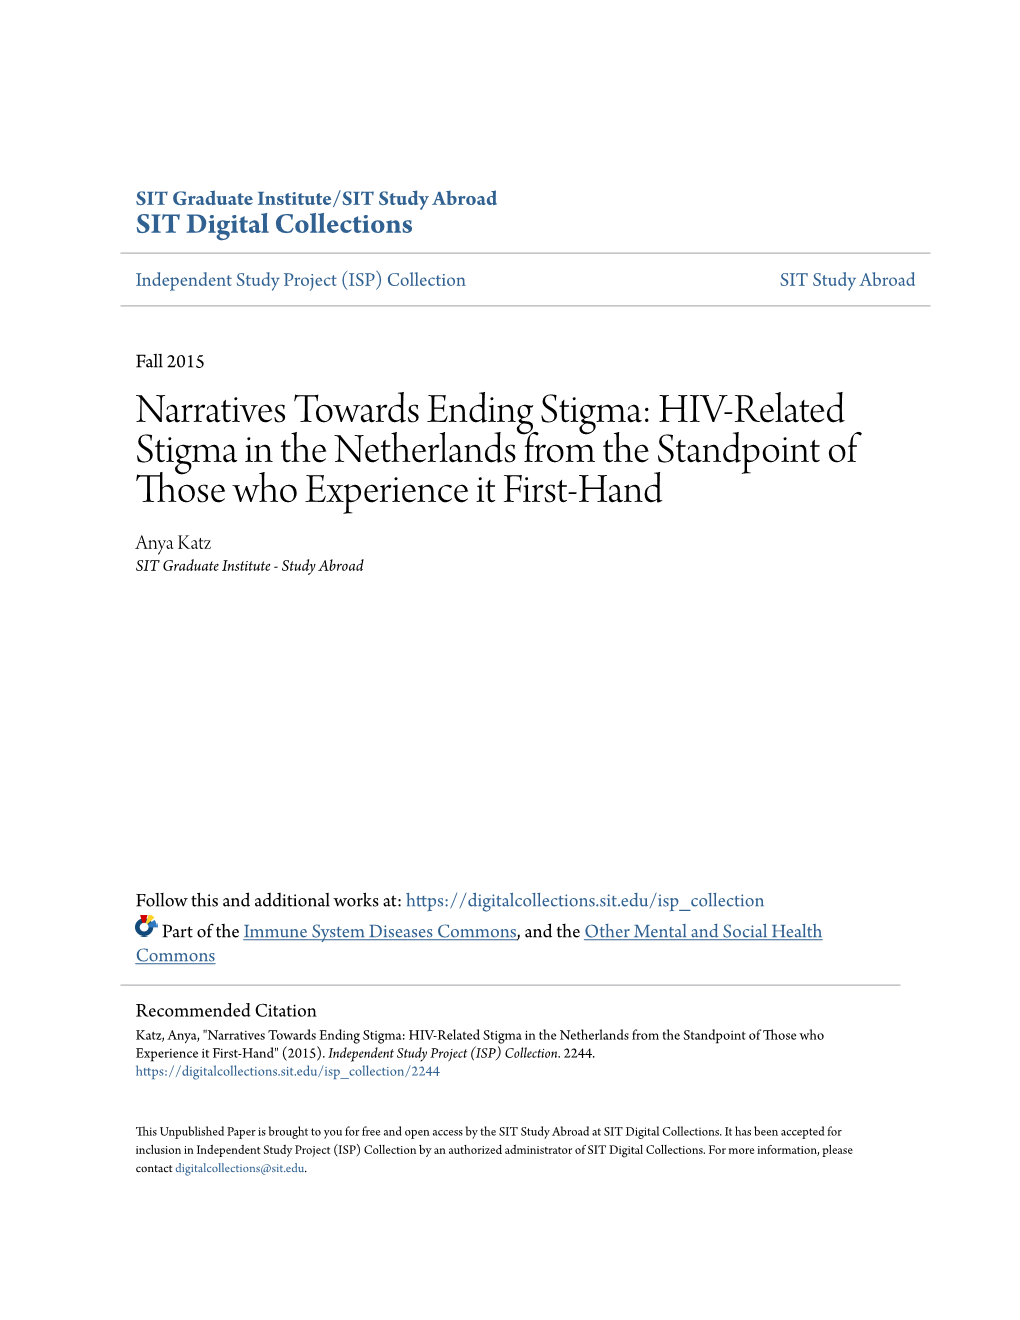 HIV-Related Stigma in the Netherlands from the Standpoint of Those Who Experience It First-Hand Anya Katz SIT Graduate Institute - Study Abroad